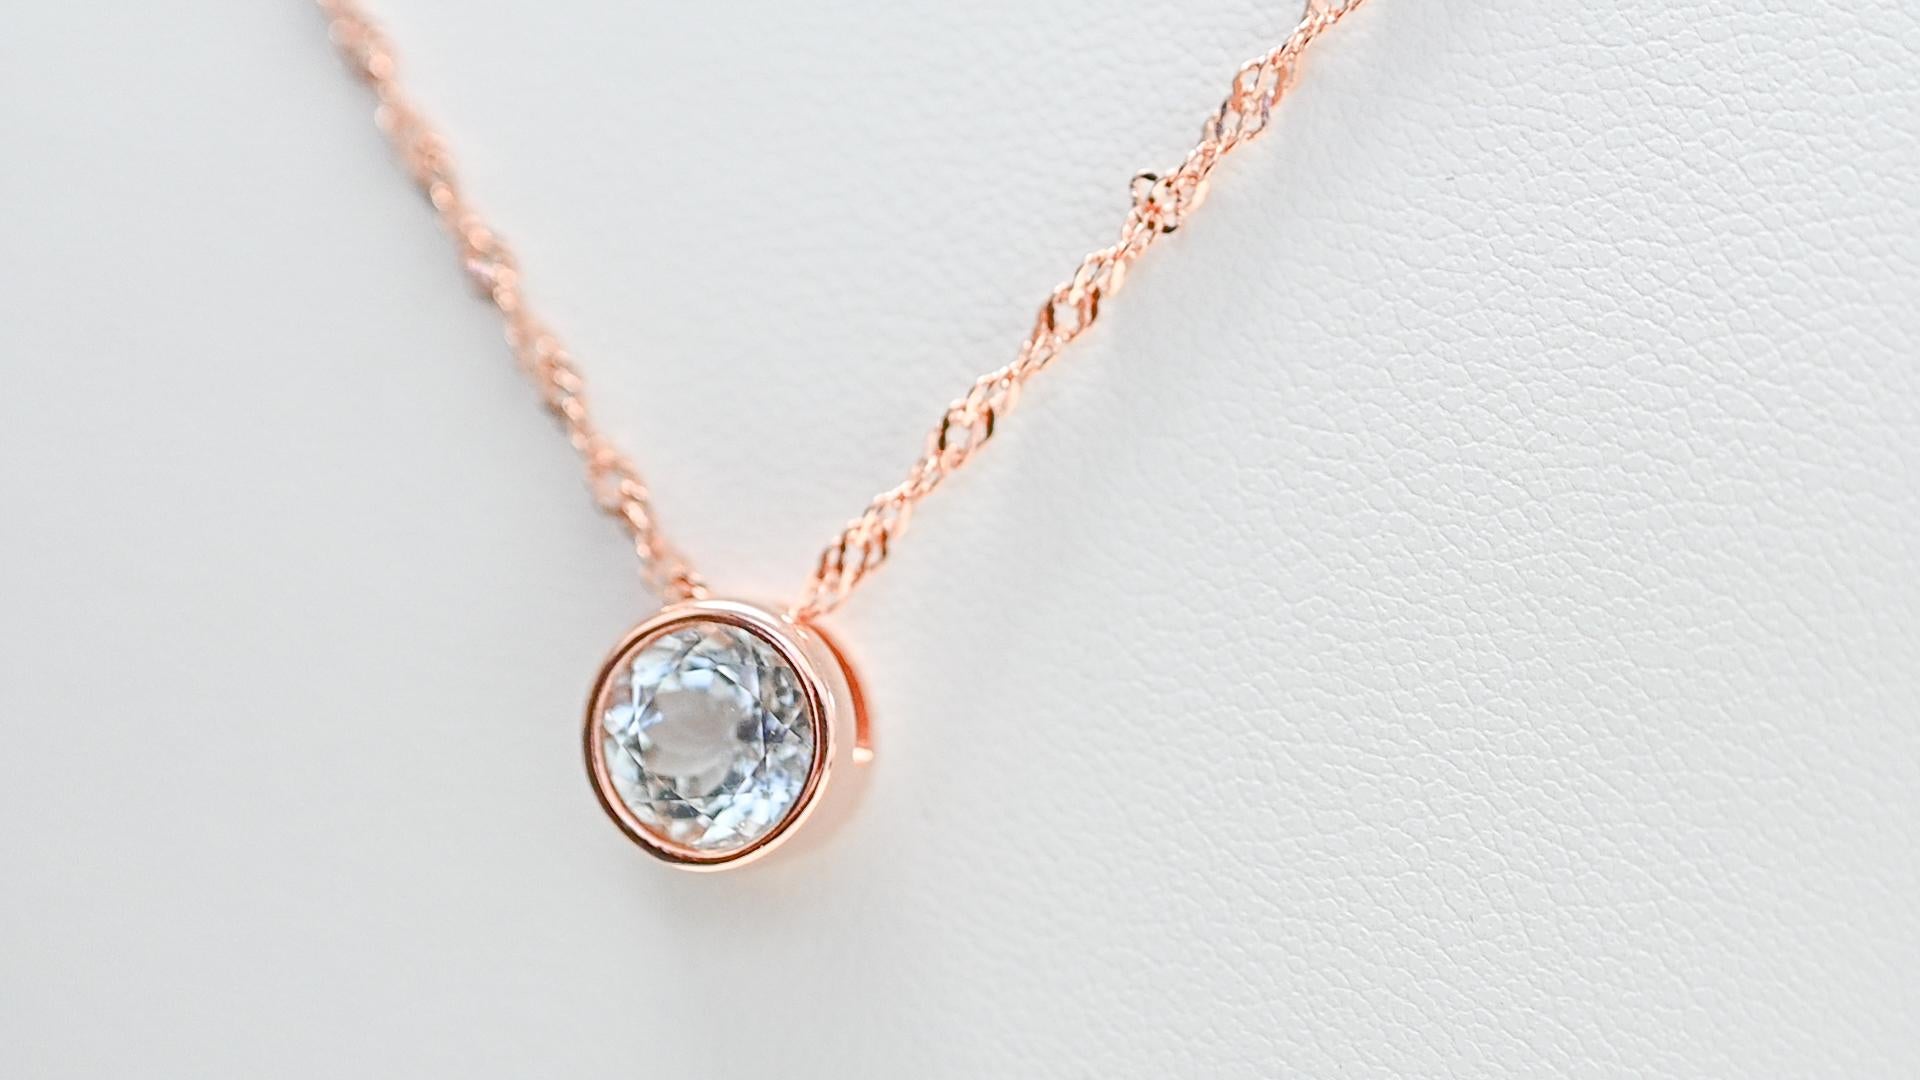 8mm Round Aquamarine Rose Gold Plated Wedding Chain Silver Pendant Necklace   For Sale 1